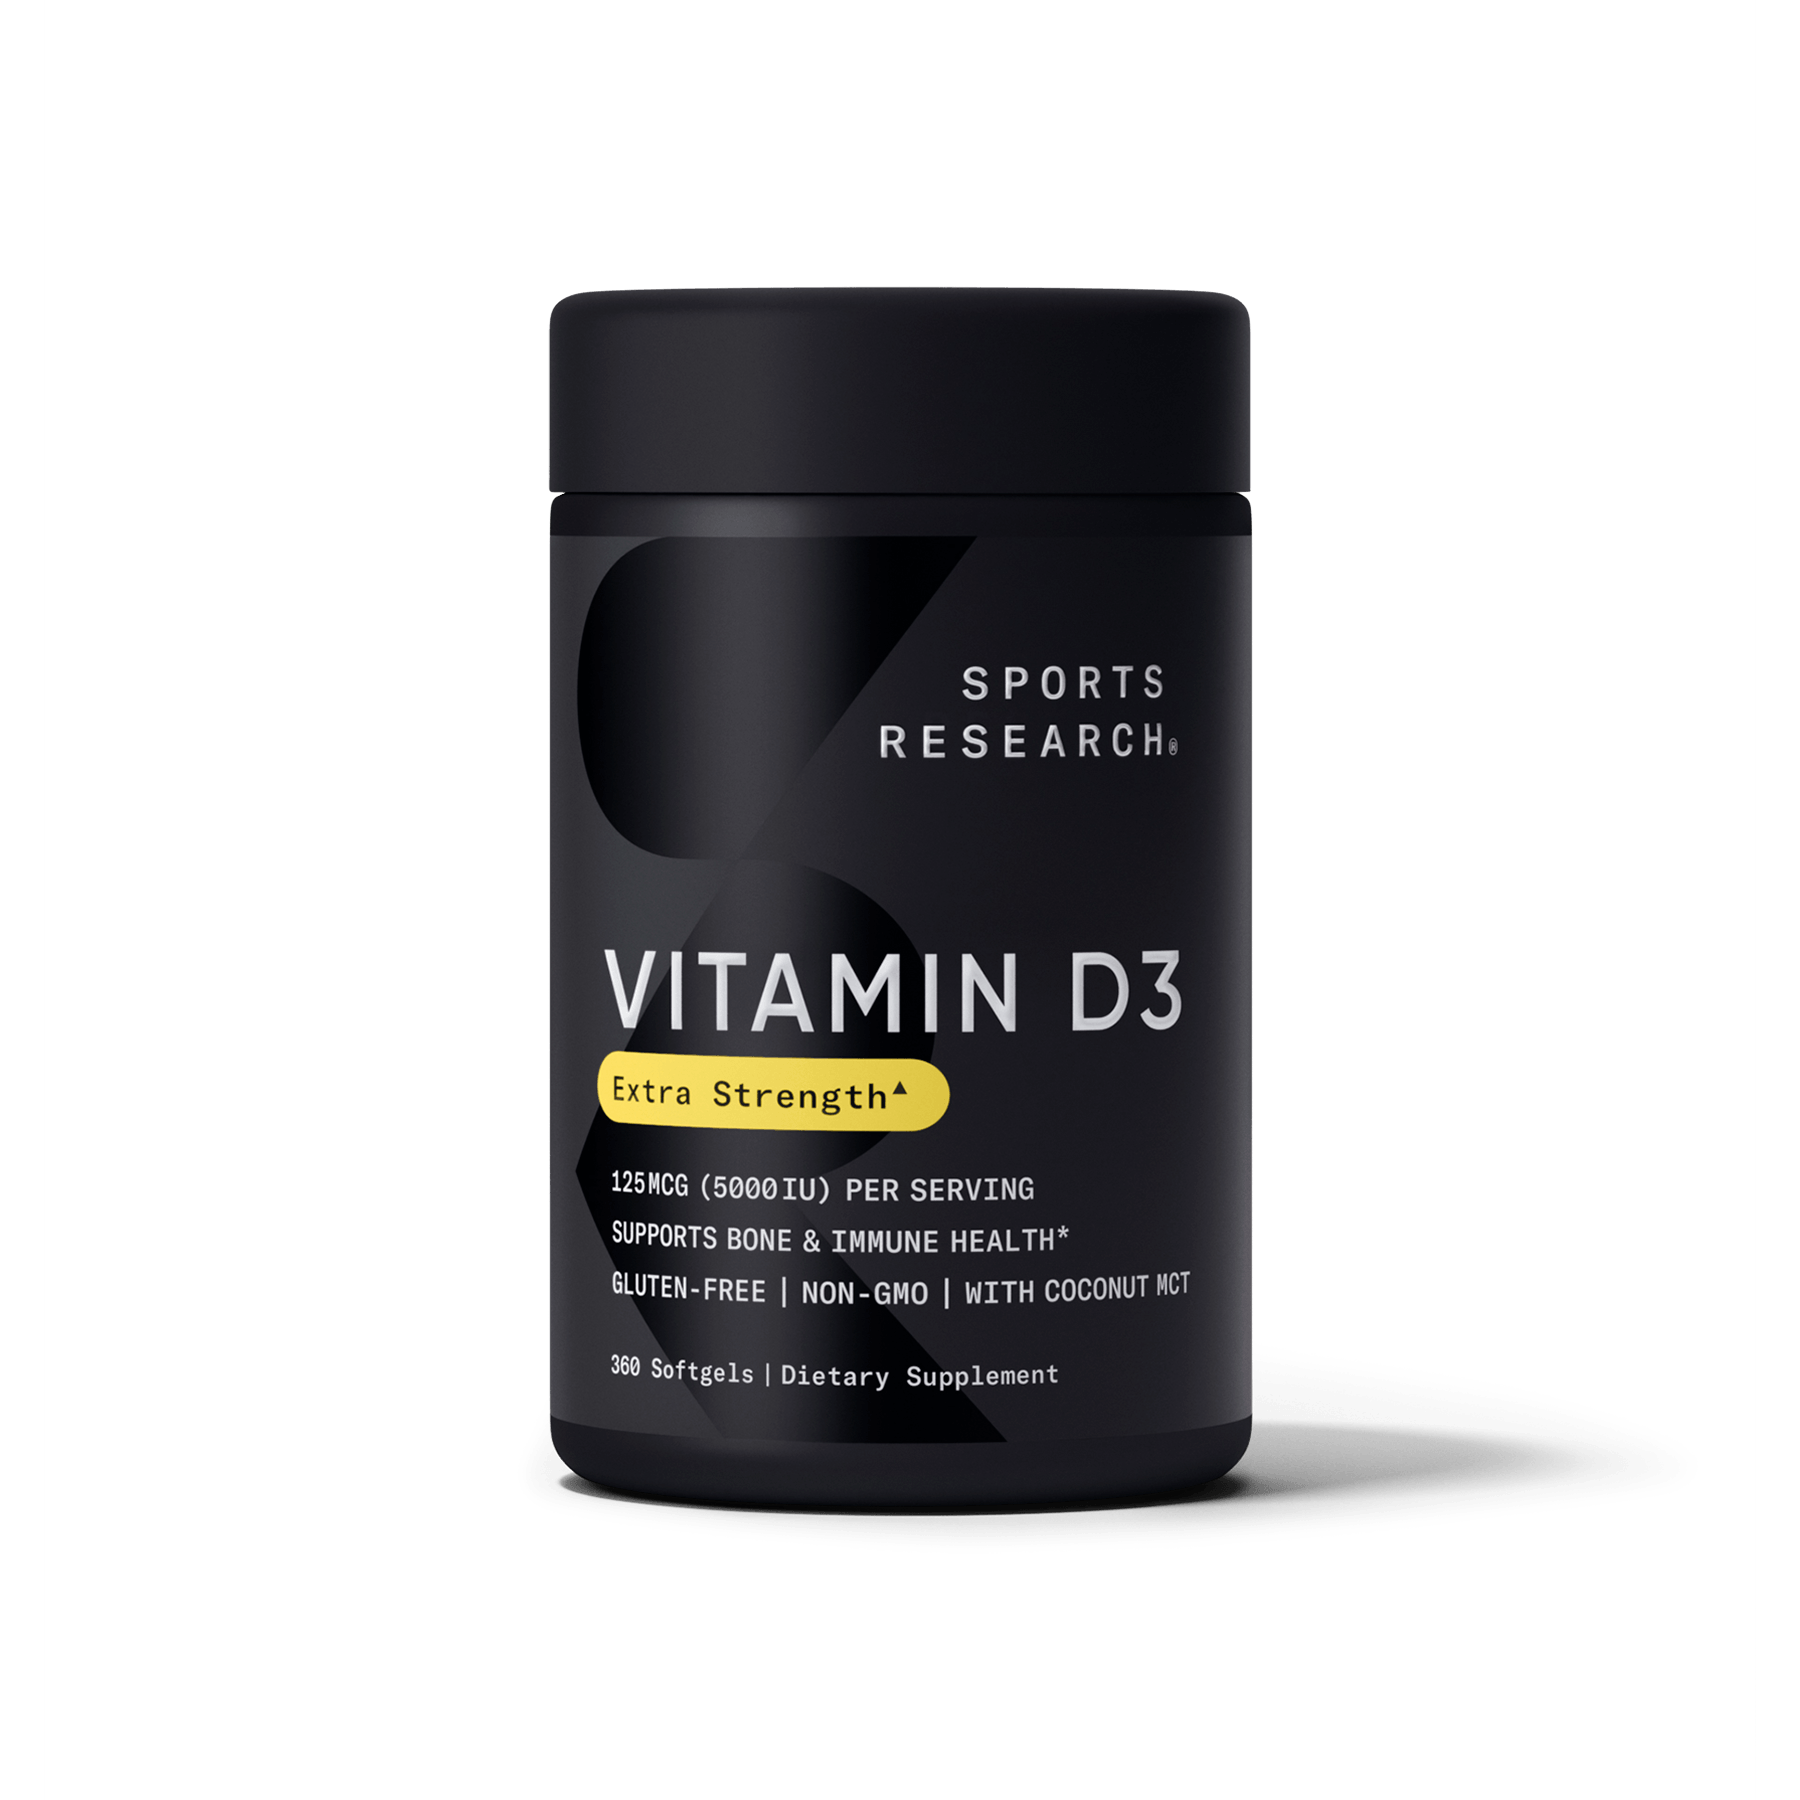 Sports Research's Vitamin D3 with Coconut MCT Oil.